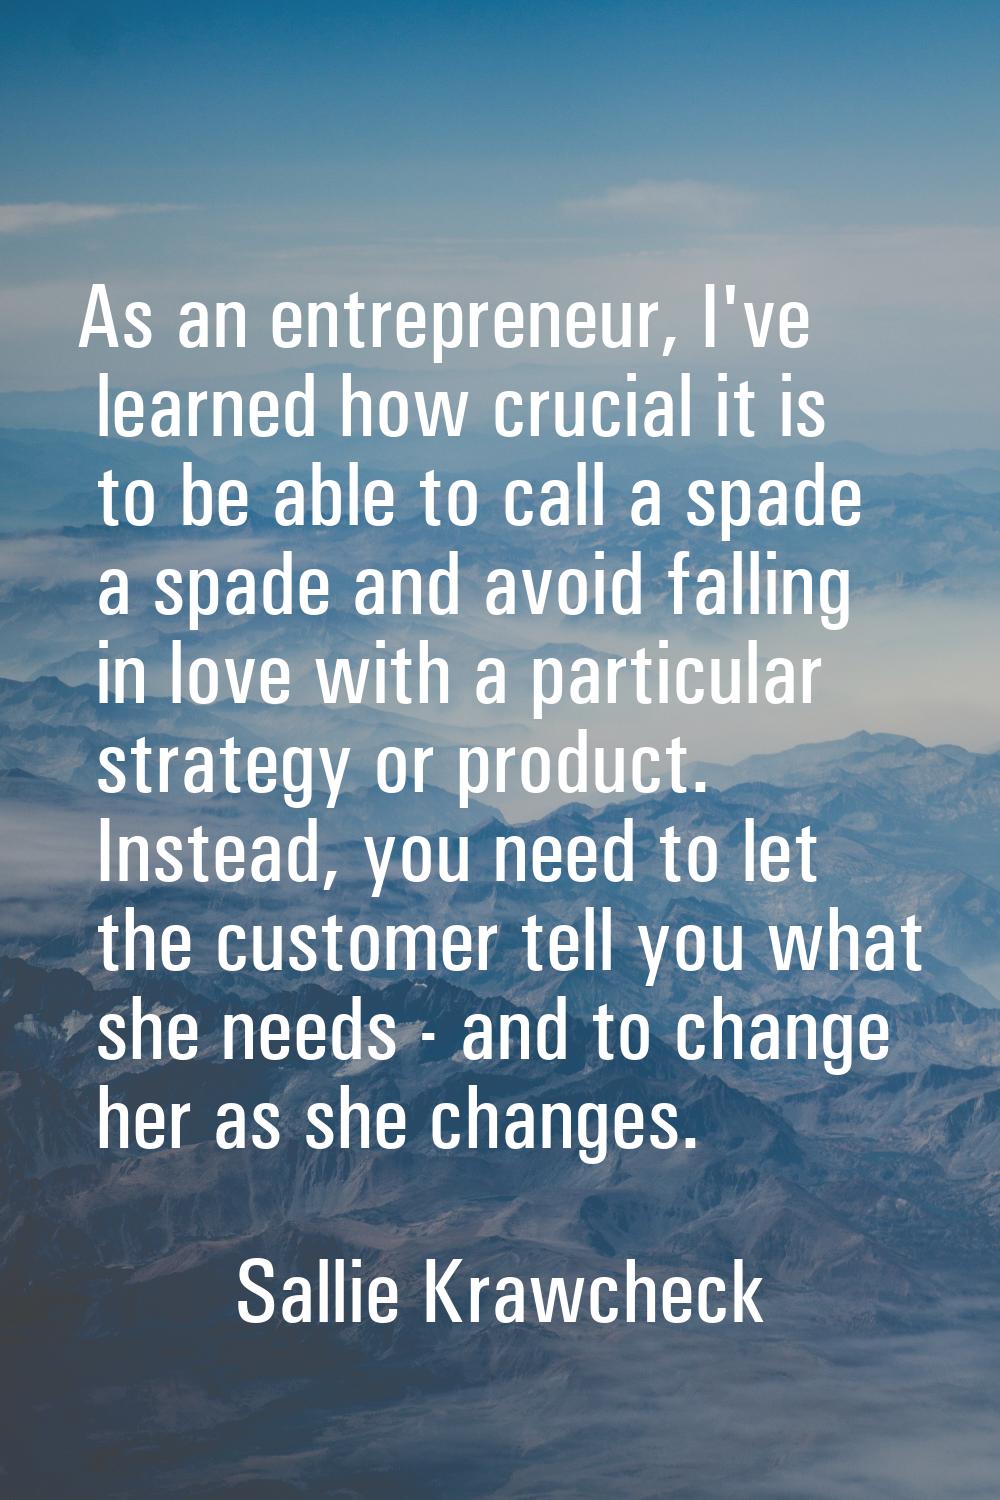 As an entrepreneur, I've learned how crucial it is to be able to call a spade a spade and avoid fal